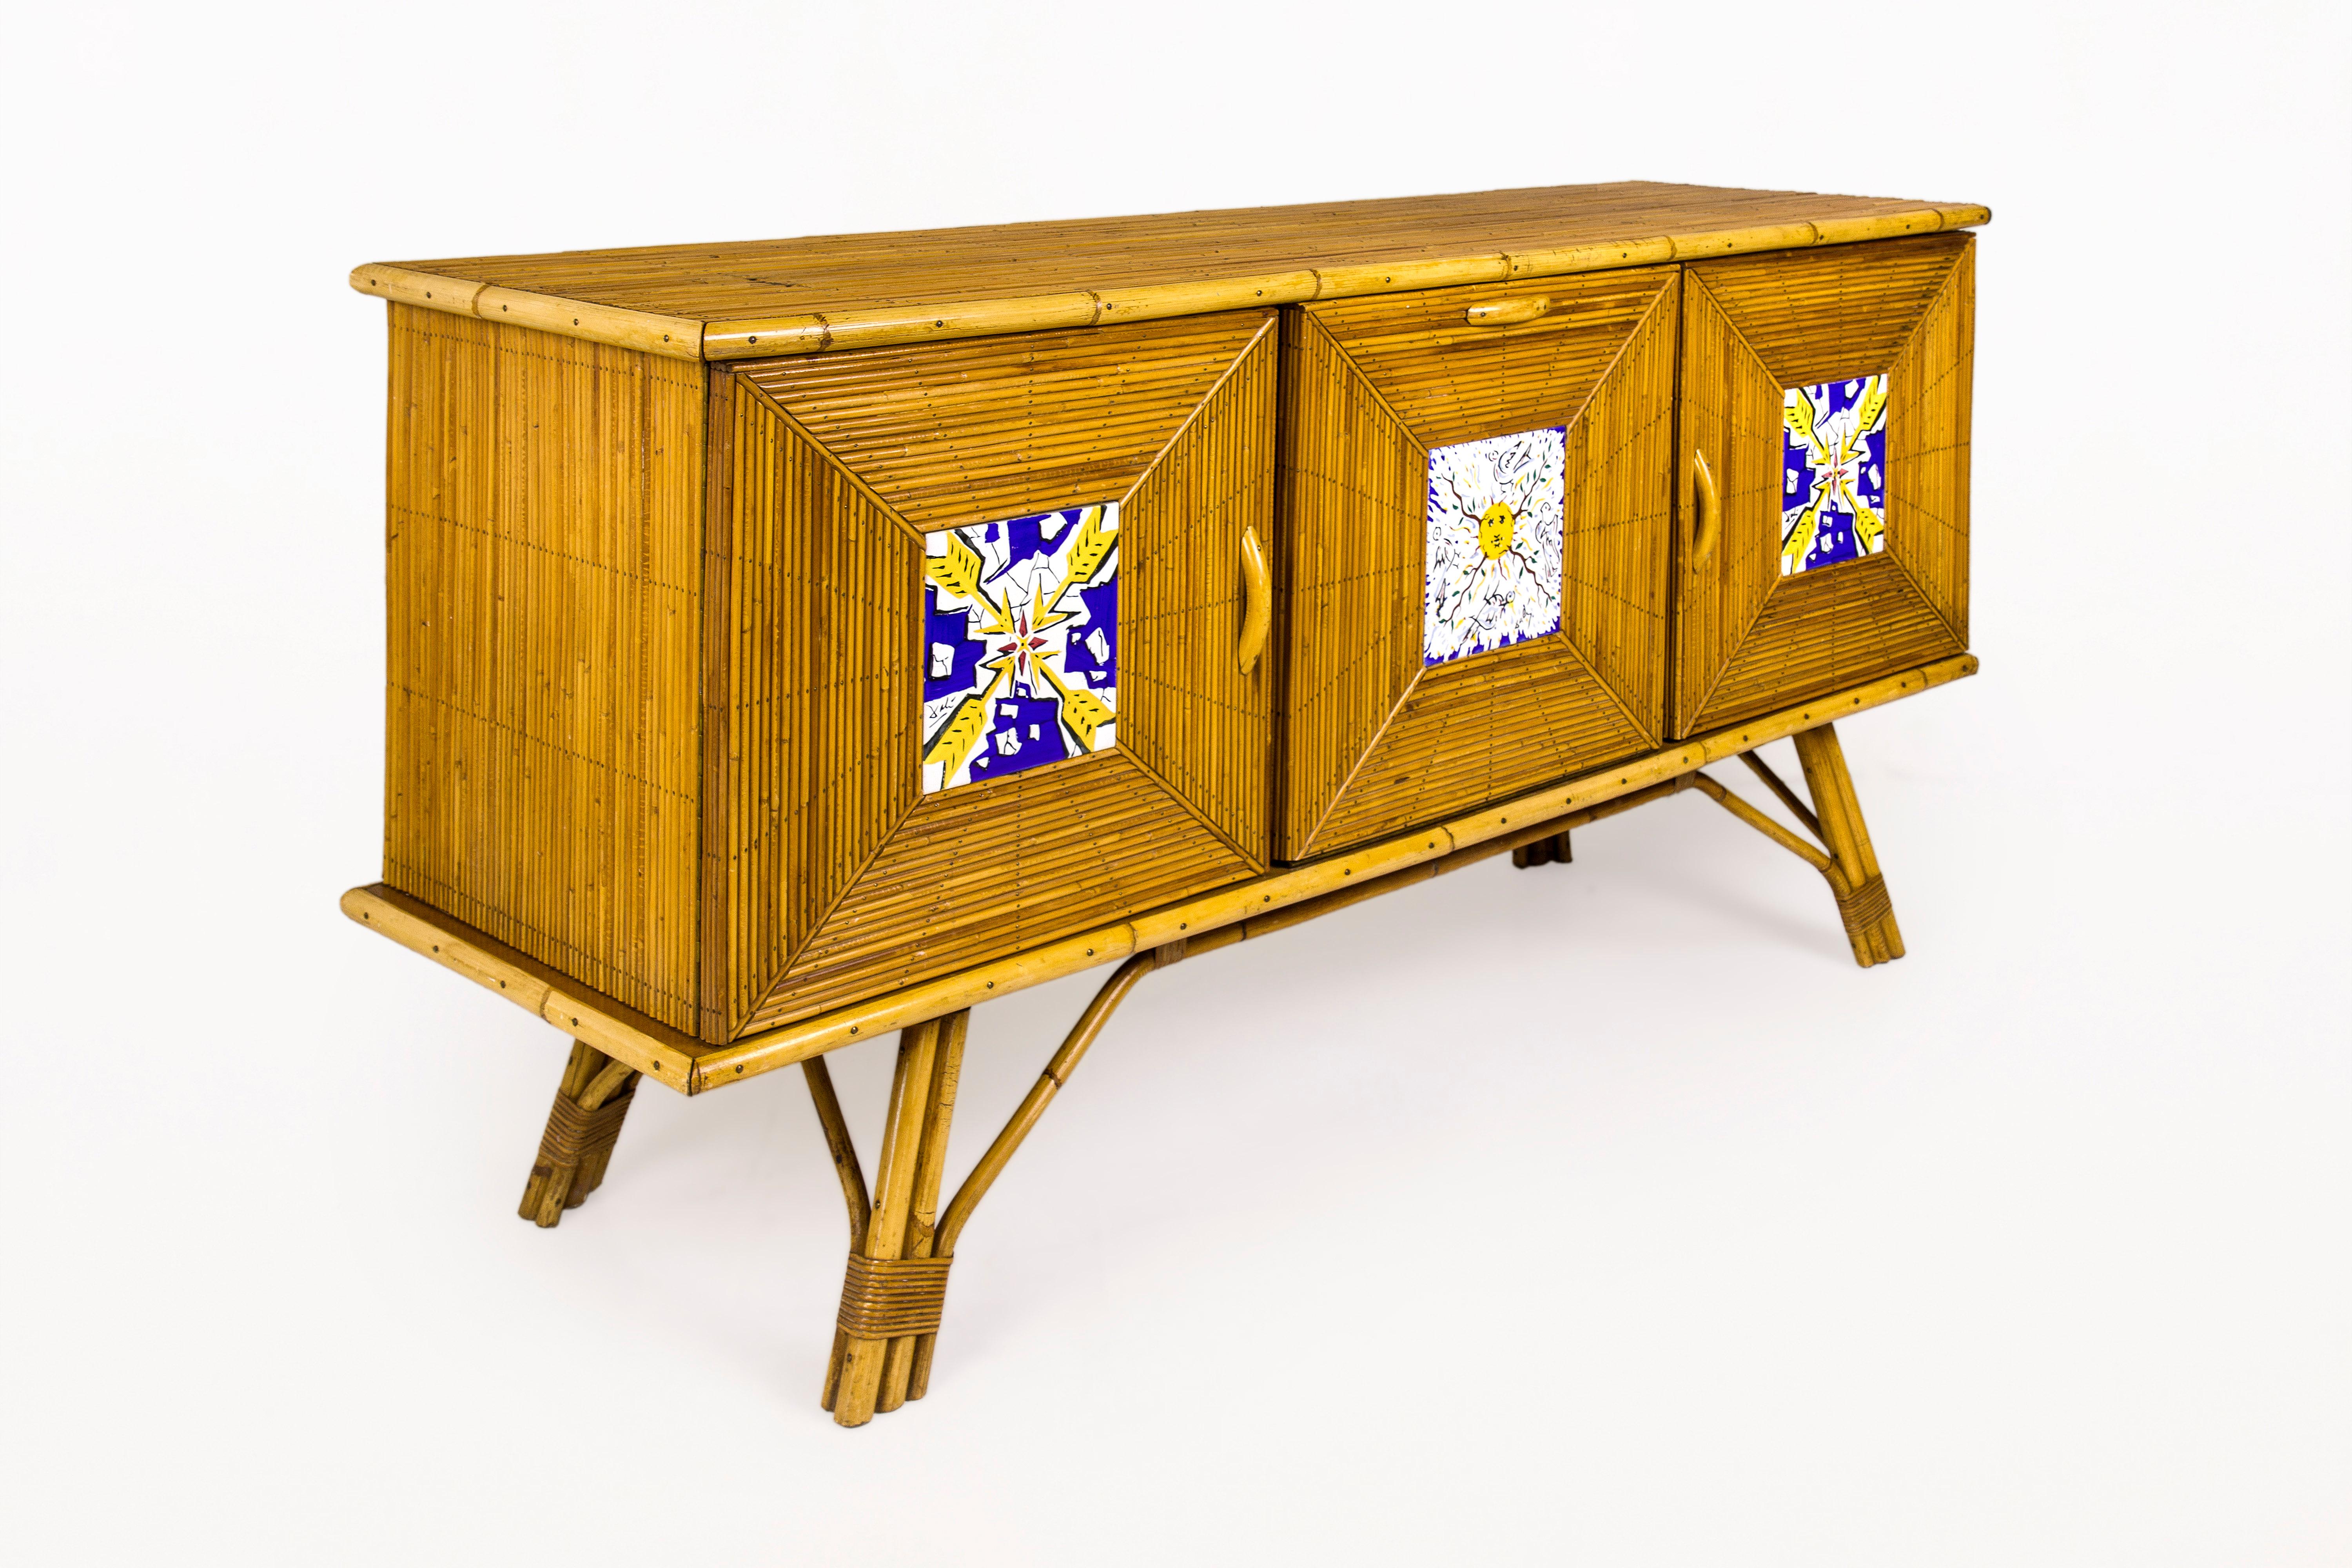 Sideboard with Salvador Dali tiles
Bamboo sideboard.
Hand painted ceramic tile: One 